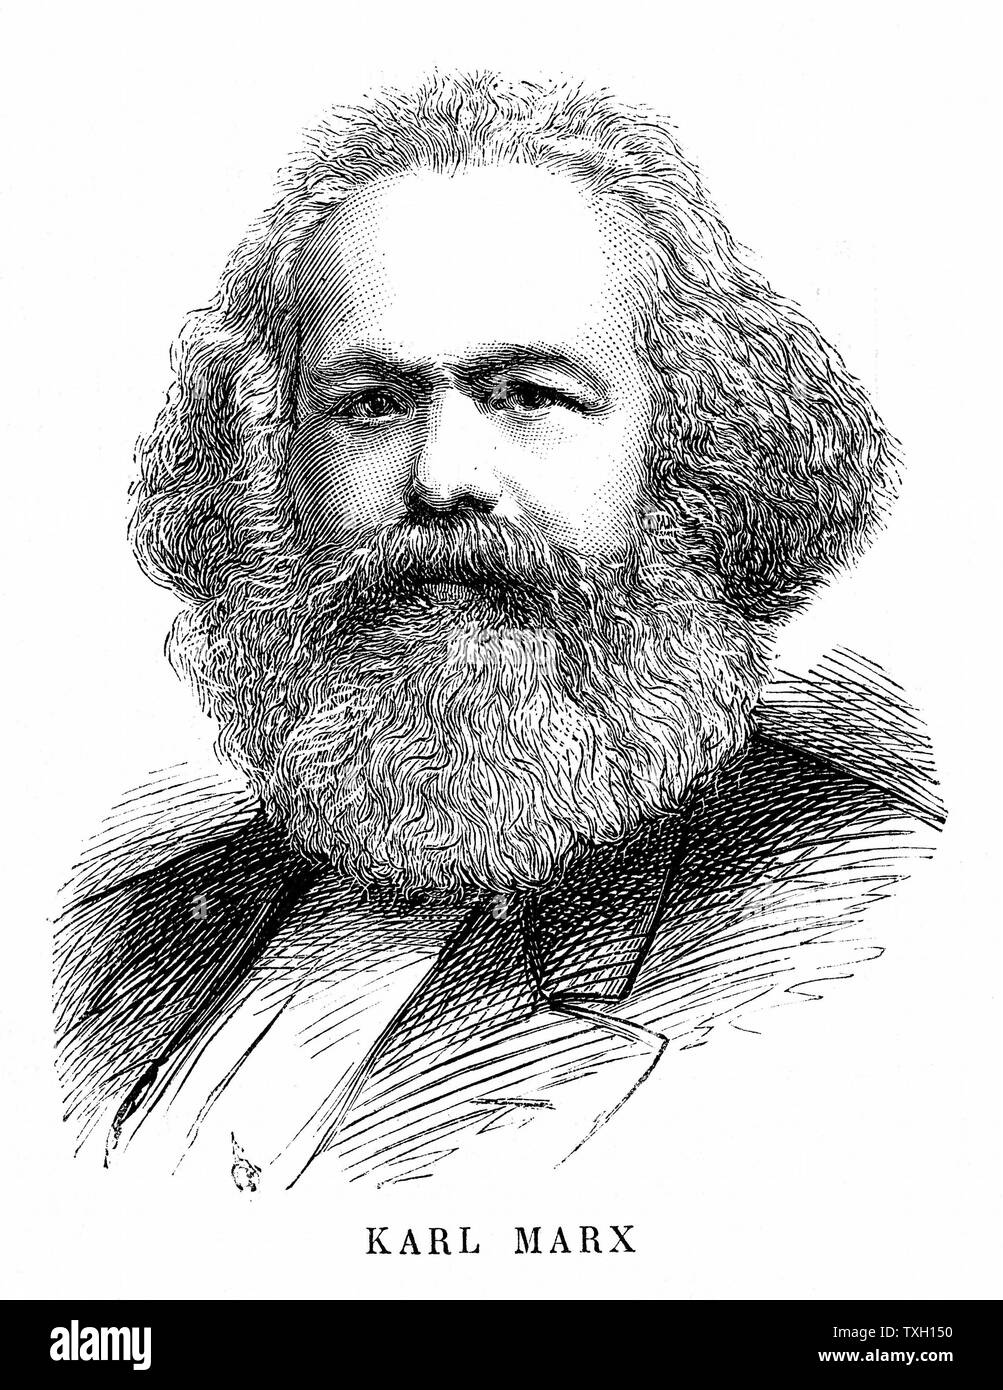 Karl Marx (1818-83) Father of modern Communism. German political, social and economic theorist. Stock Photo